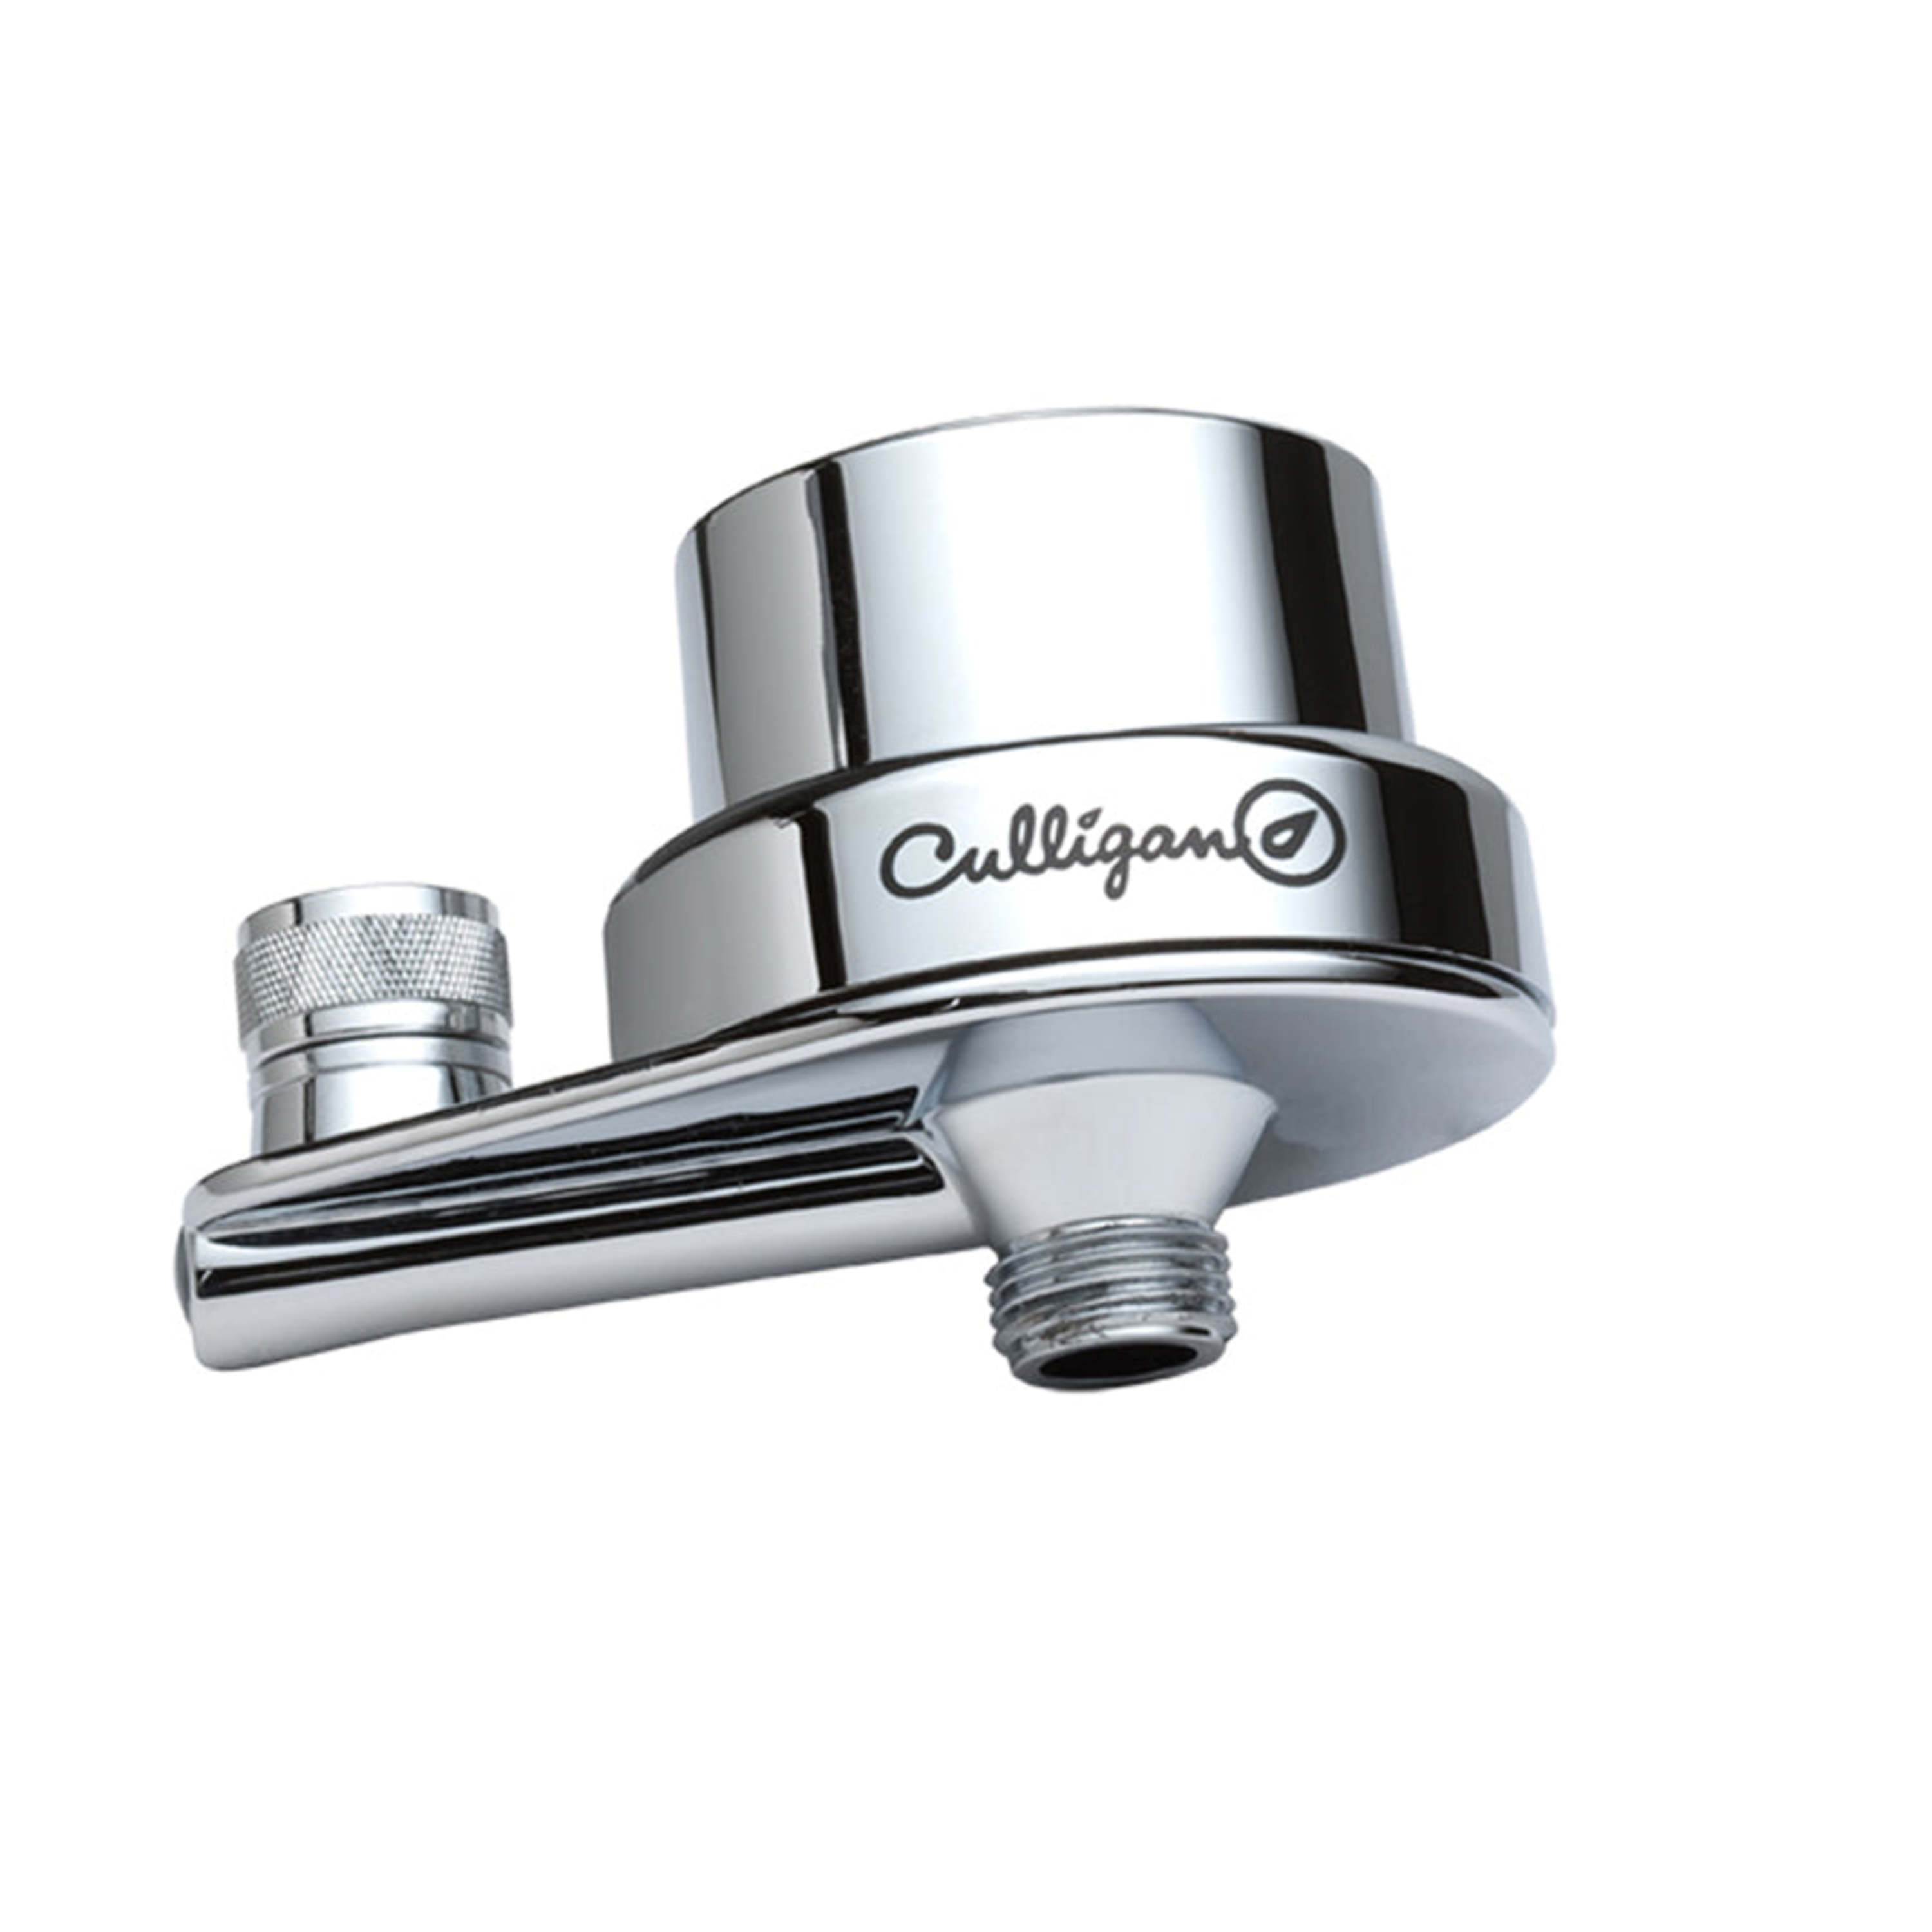 Culligan Ish-200C In-Line Shower Filter - Chrome - image 2 of 2